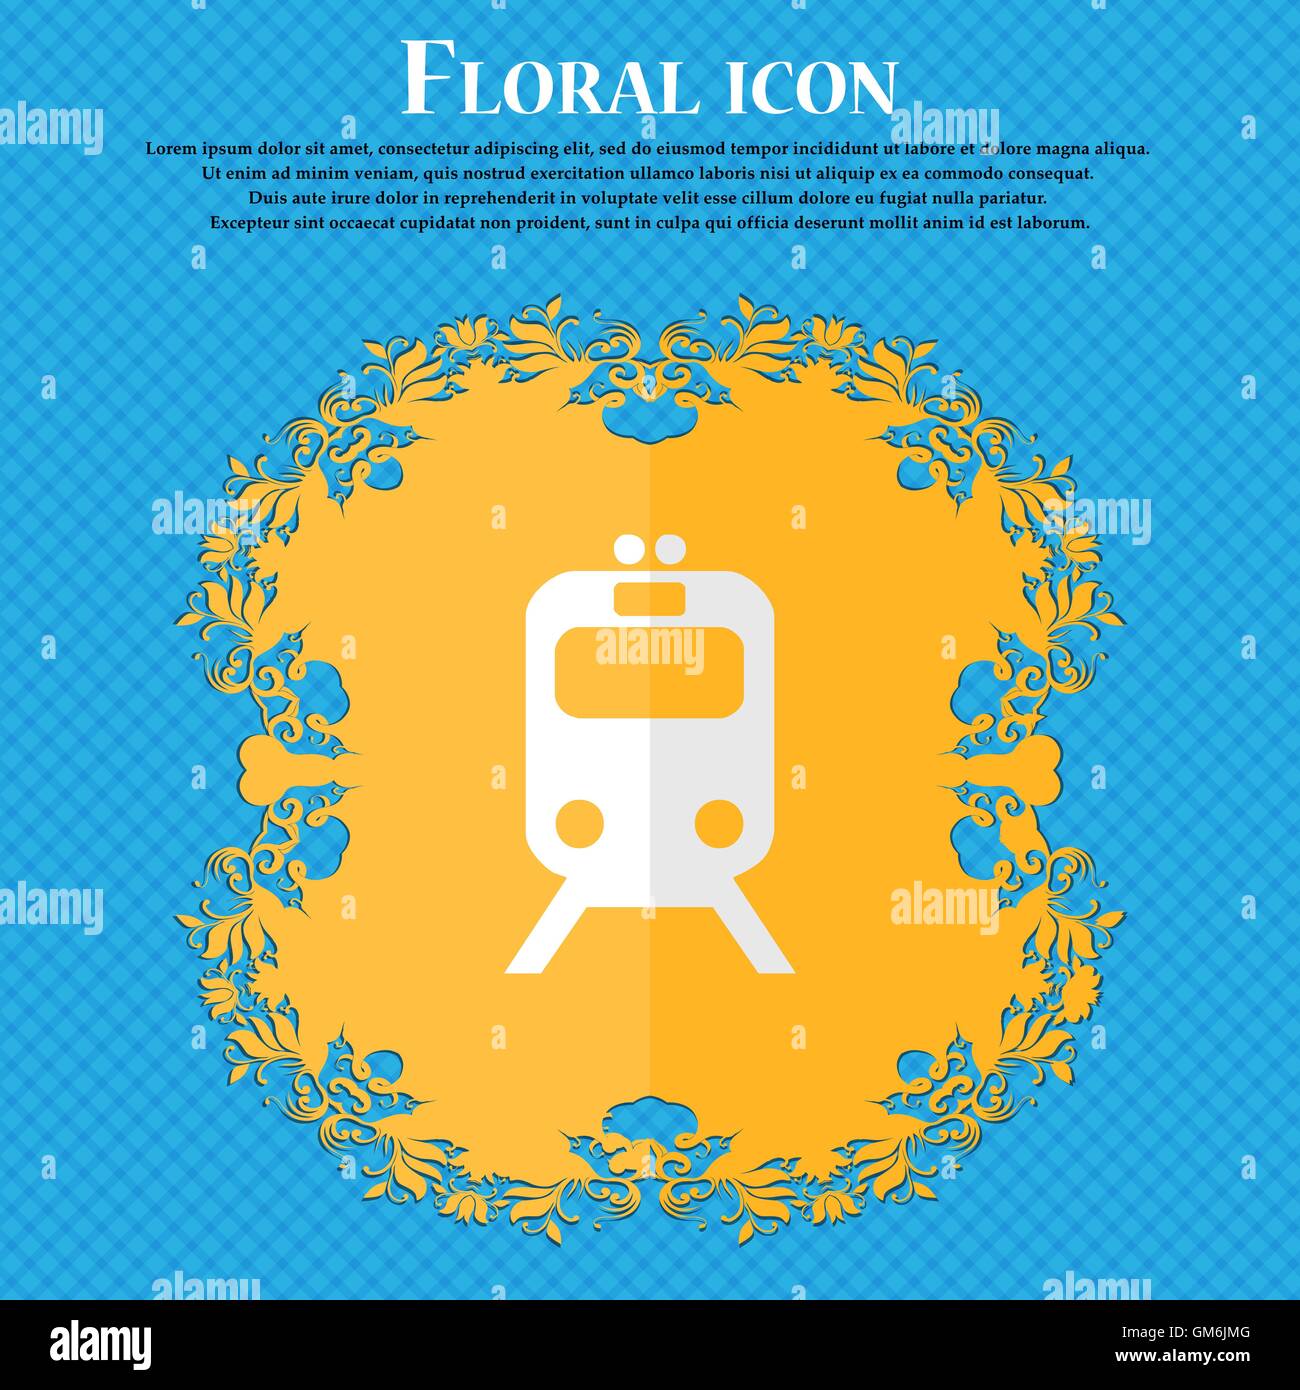 train. Floral flat design on a blue abstract background with place for your text. Vector Stock Vector